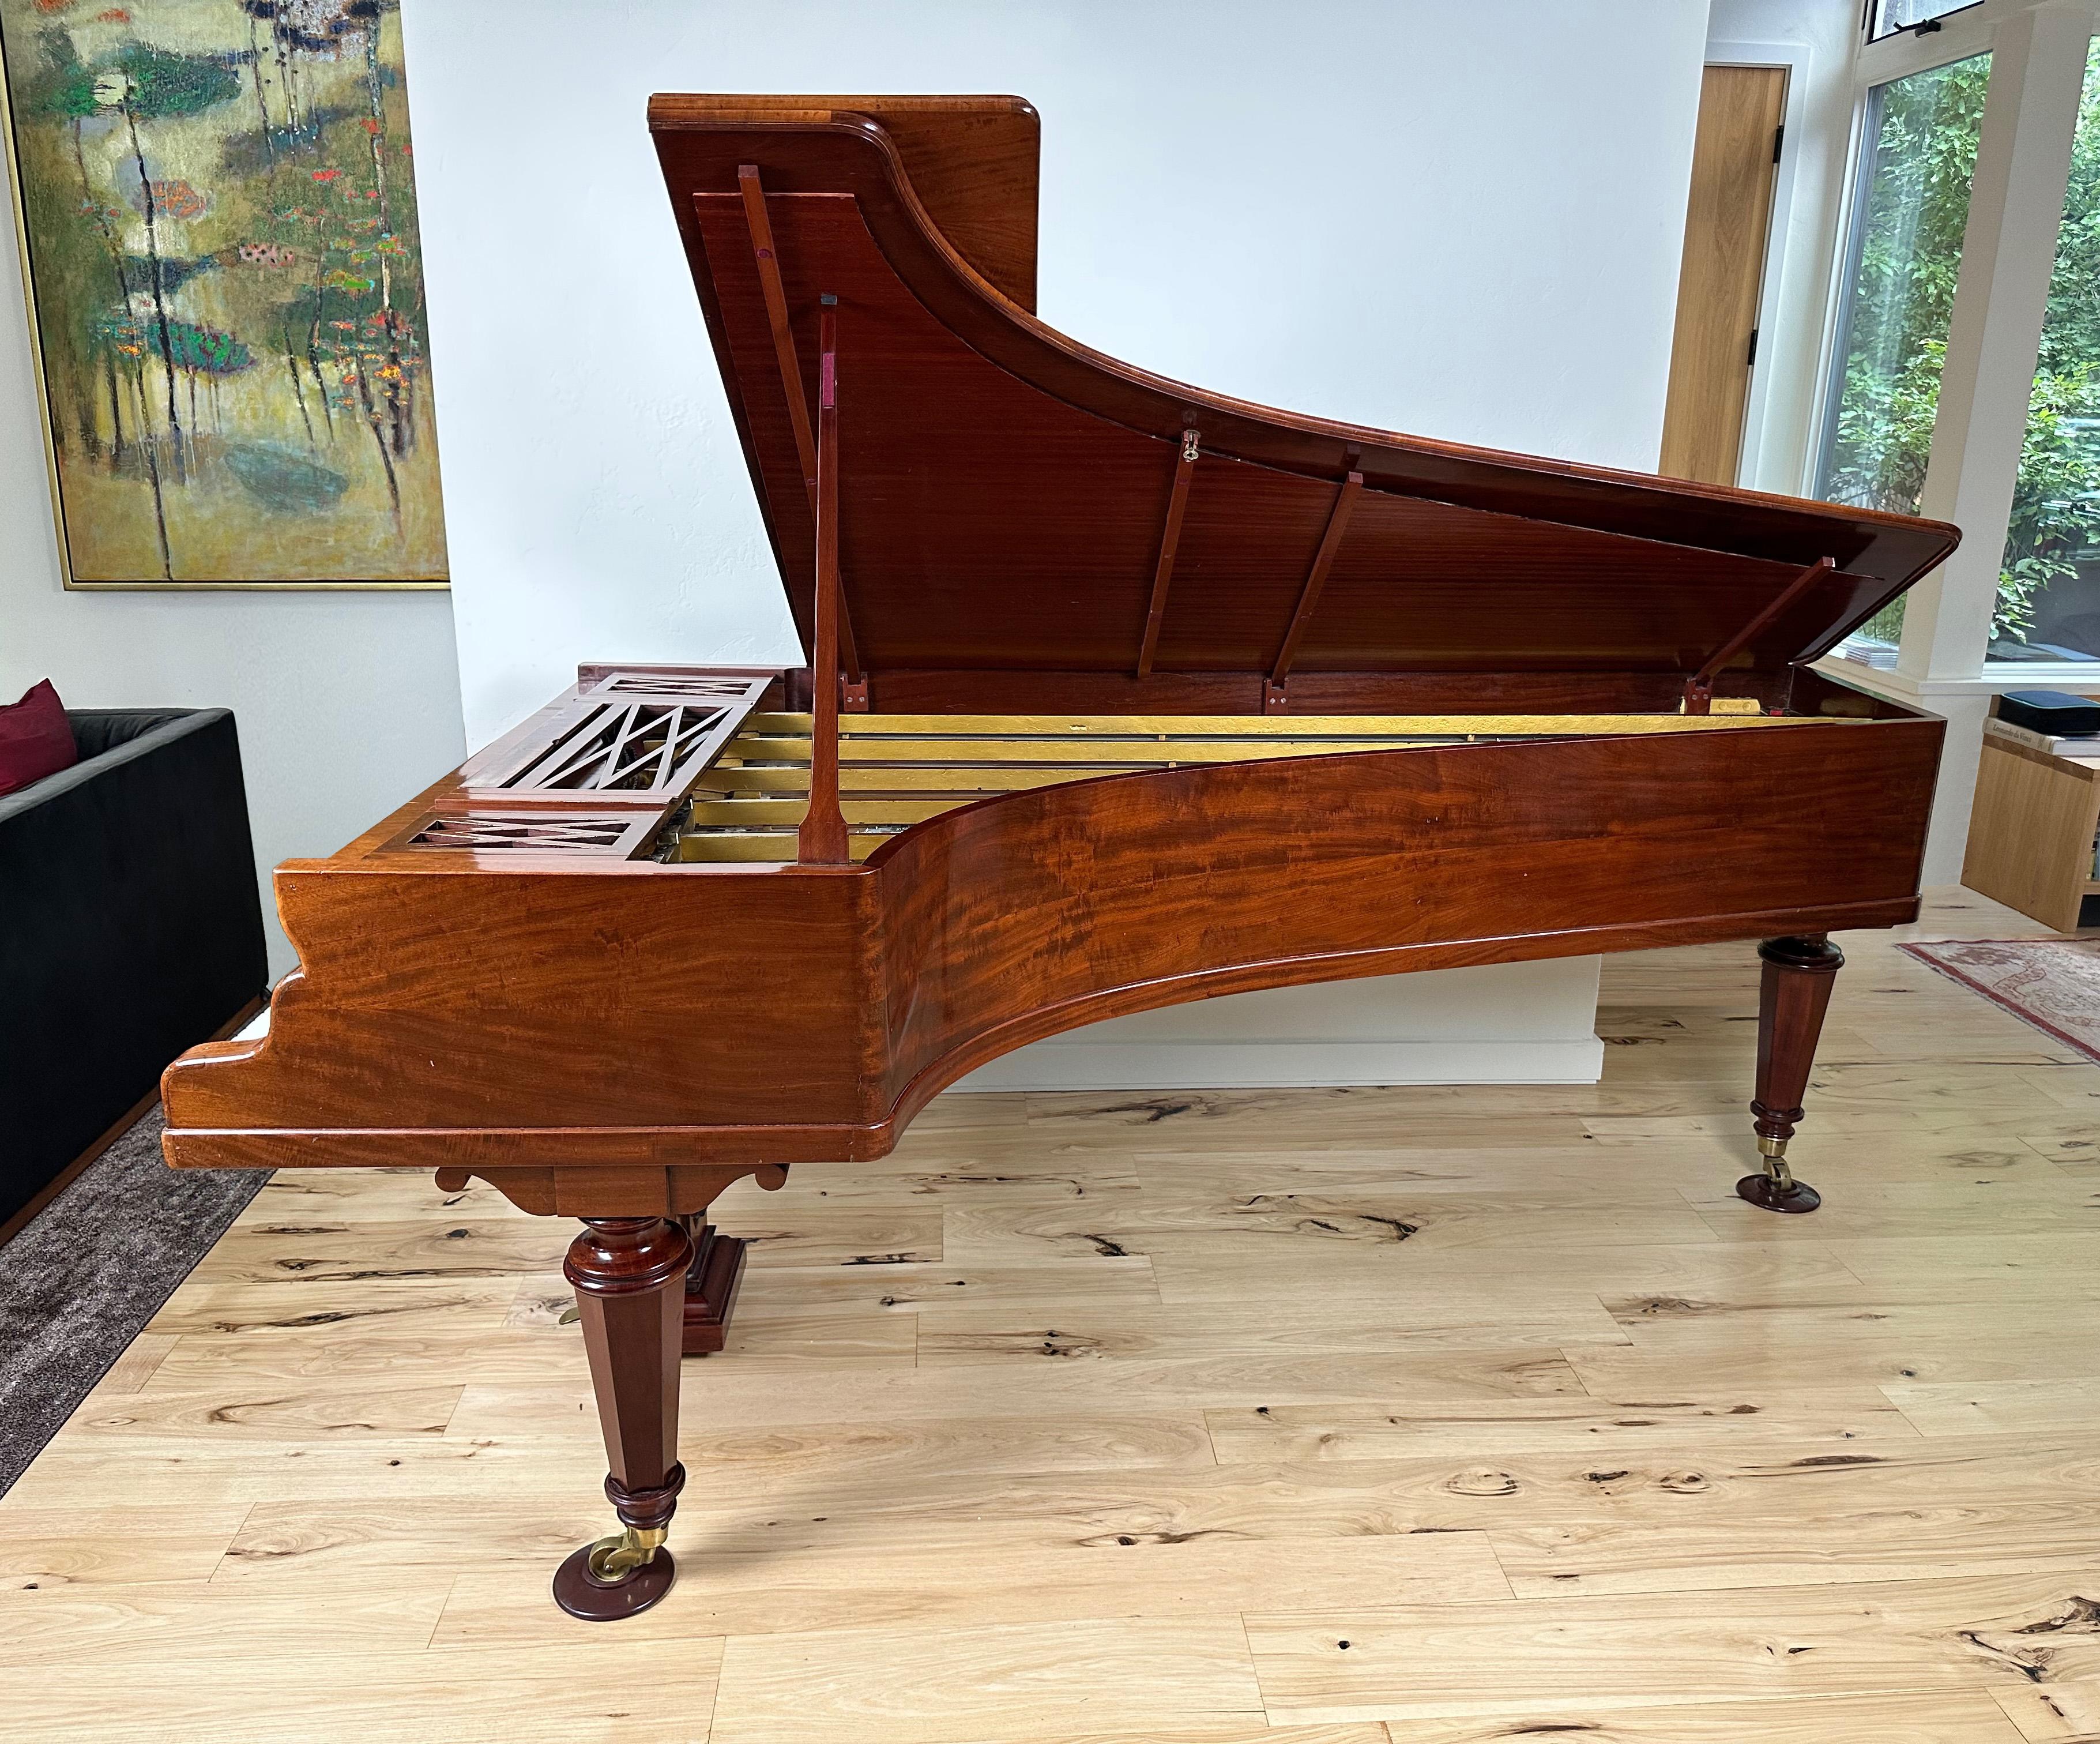 This Erard parallel-strung grand piano, crafted in Paris in 1845, has been extraordinarily well-tended, restored and maintained, enduring today as not only a spectacular example of the pinnacle of 19th Century piano design - characterized by its